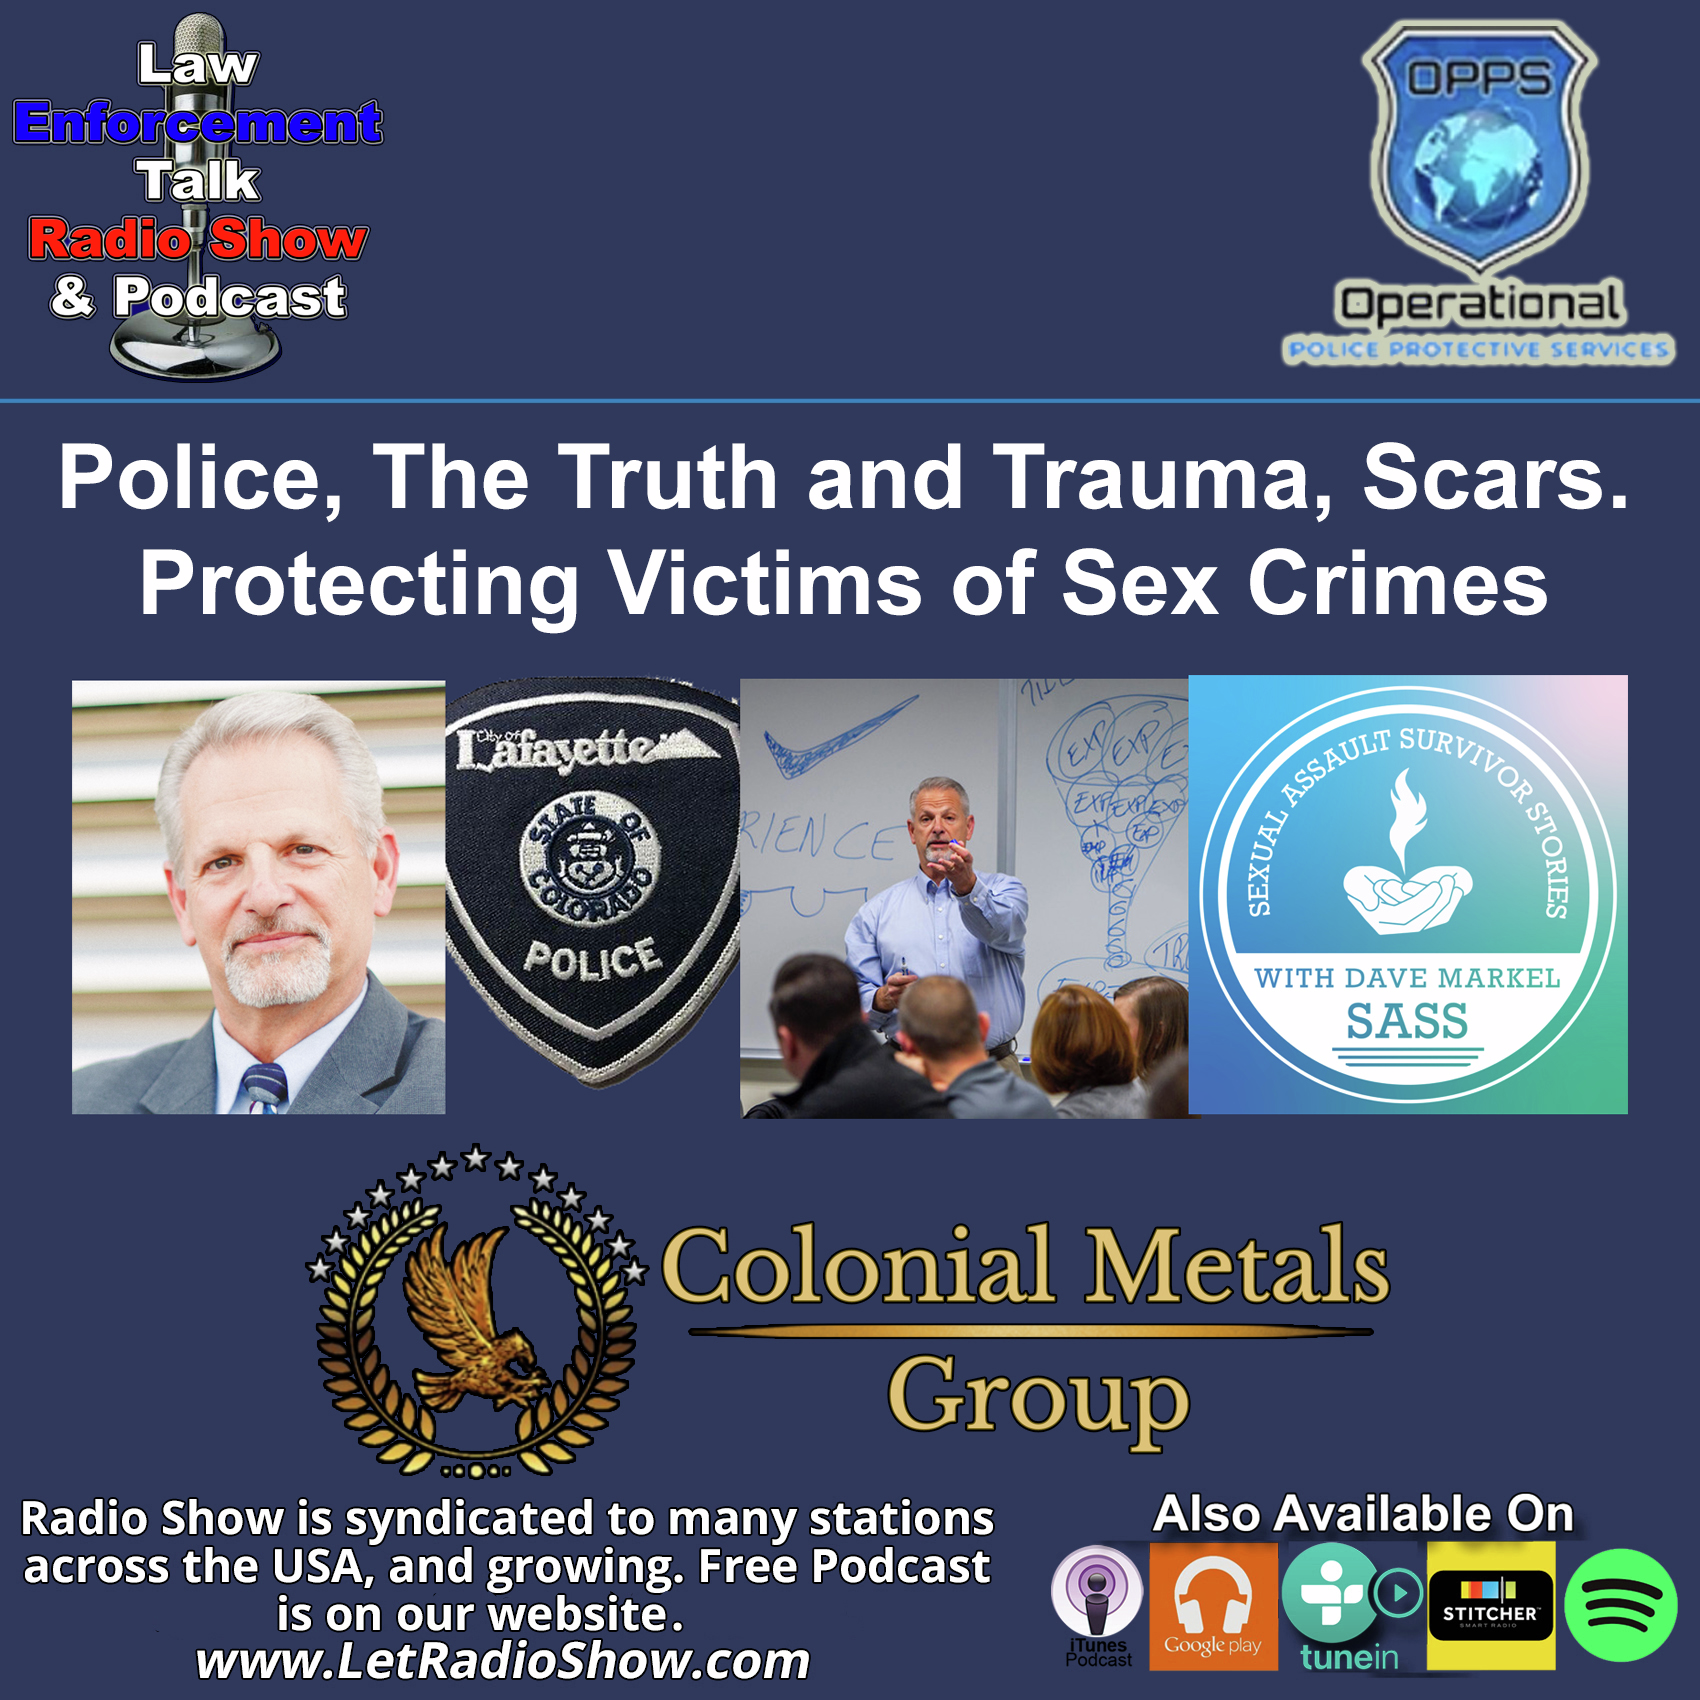 Police, The Truth Trauma, Scars and Protecting Victims.